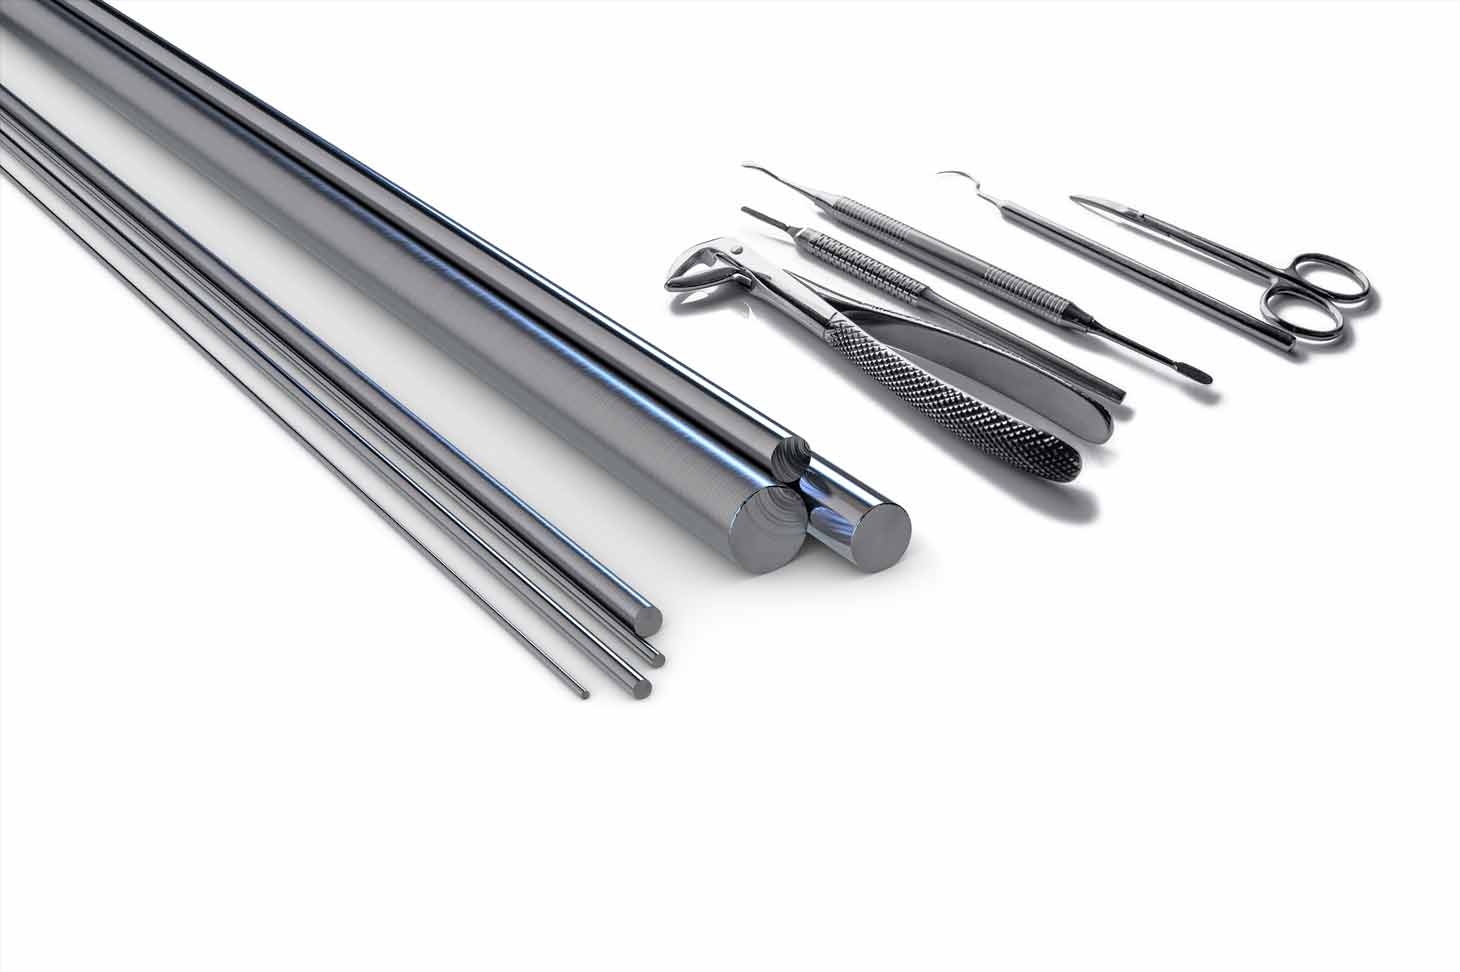 Raw stainless steel and surgical precision instruments made of voestalpine stainless steel